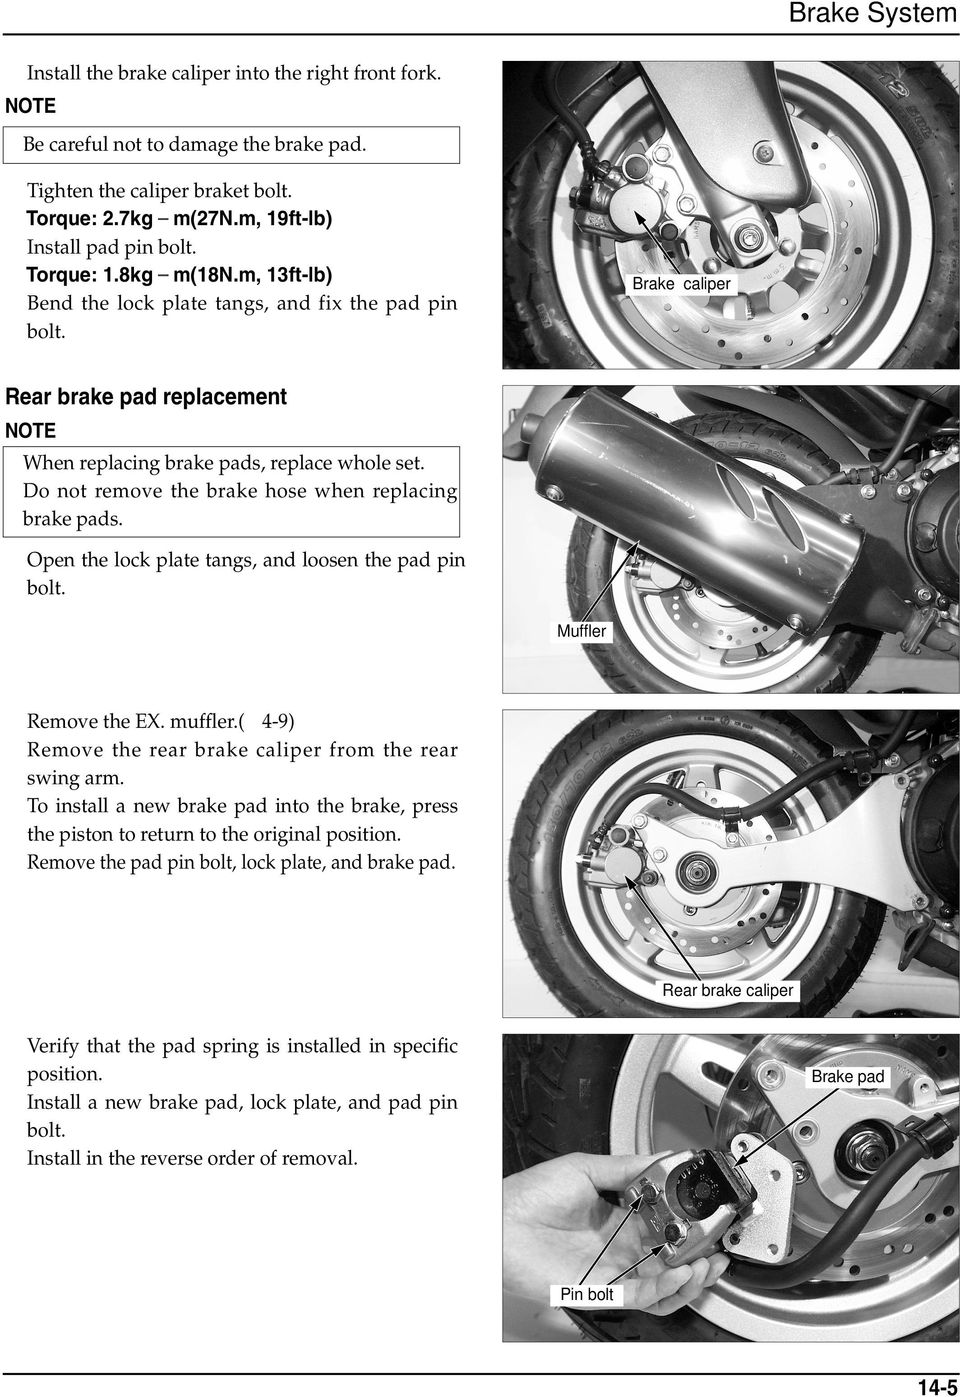 Do not remove the brake hose when replacing brake pads. Open the lock plate tangs, and loosen the pad pin bolt. Muffler Remove the EX. muffler.